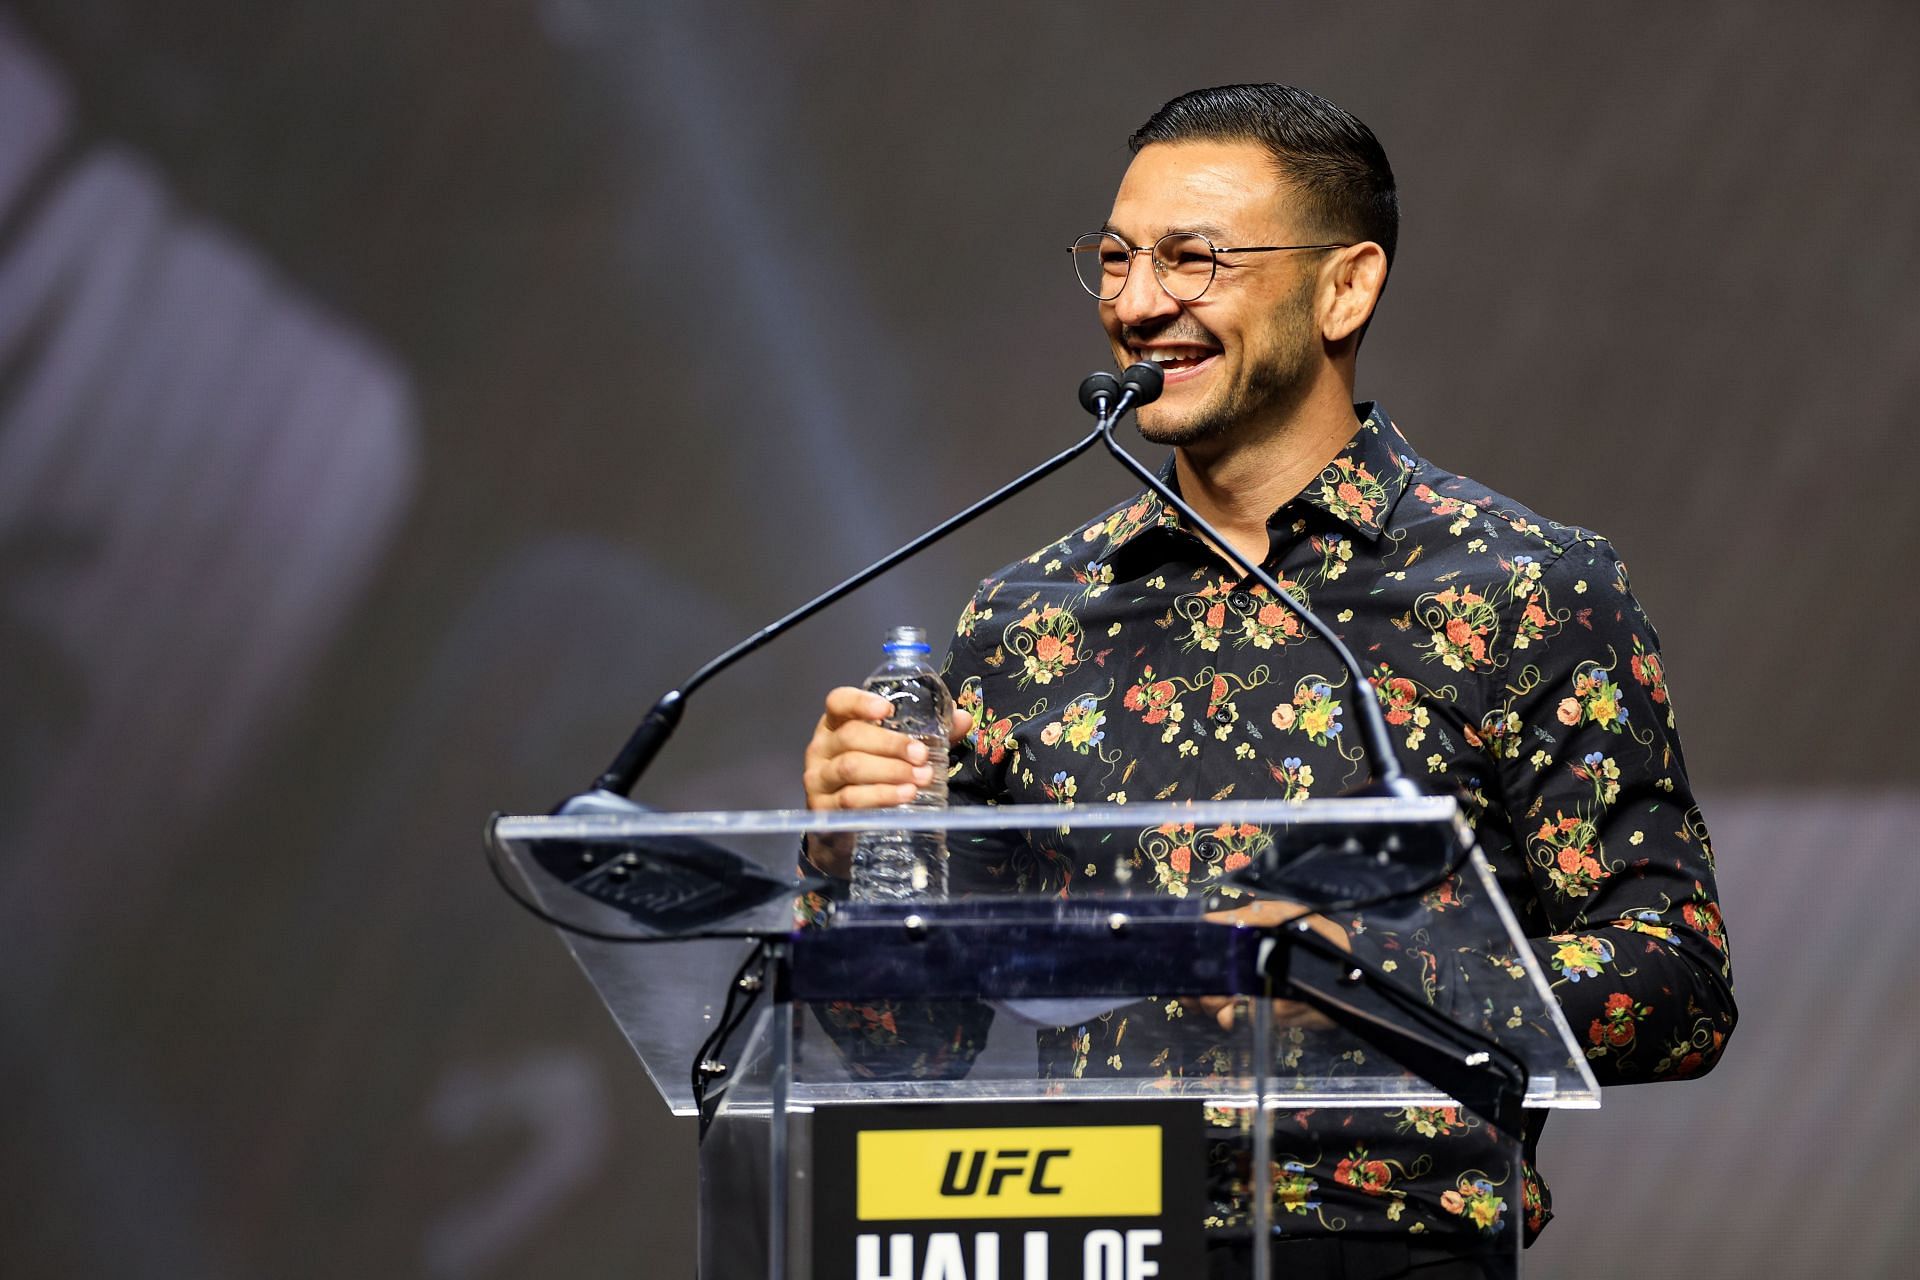 Cub Swanson at the UFC Hall of Fame Class of 2022 Induction Ceremony